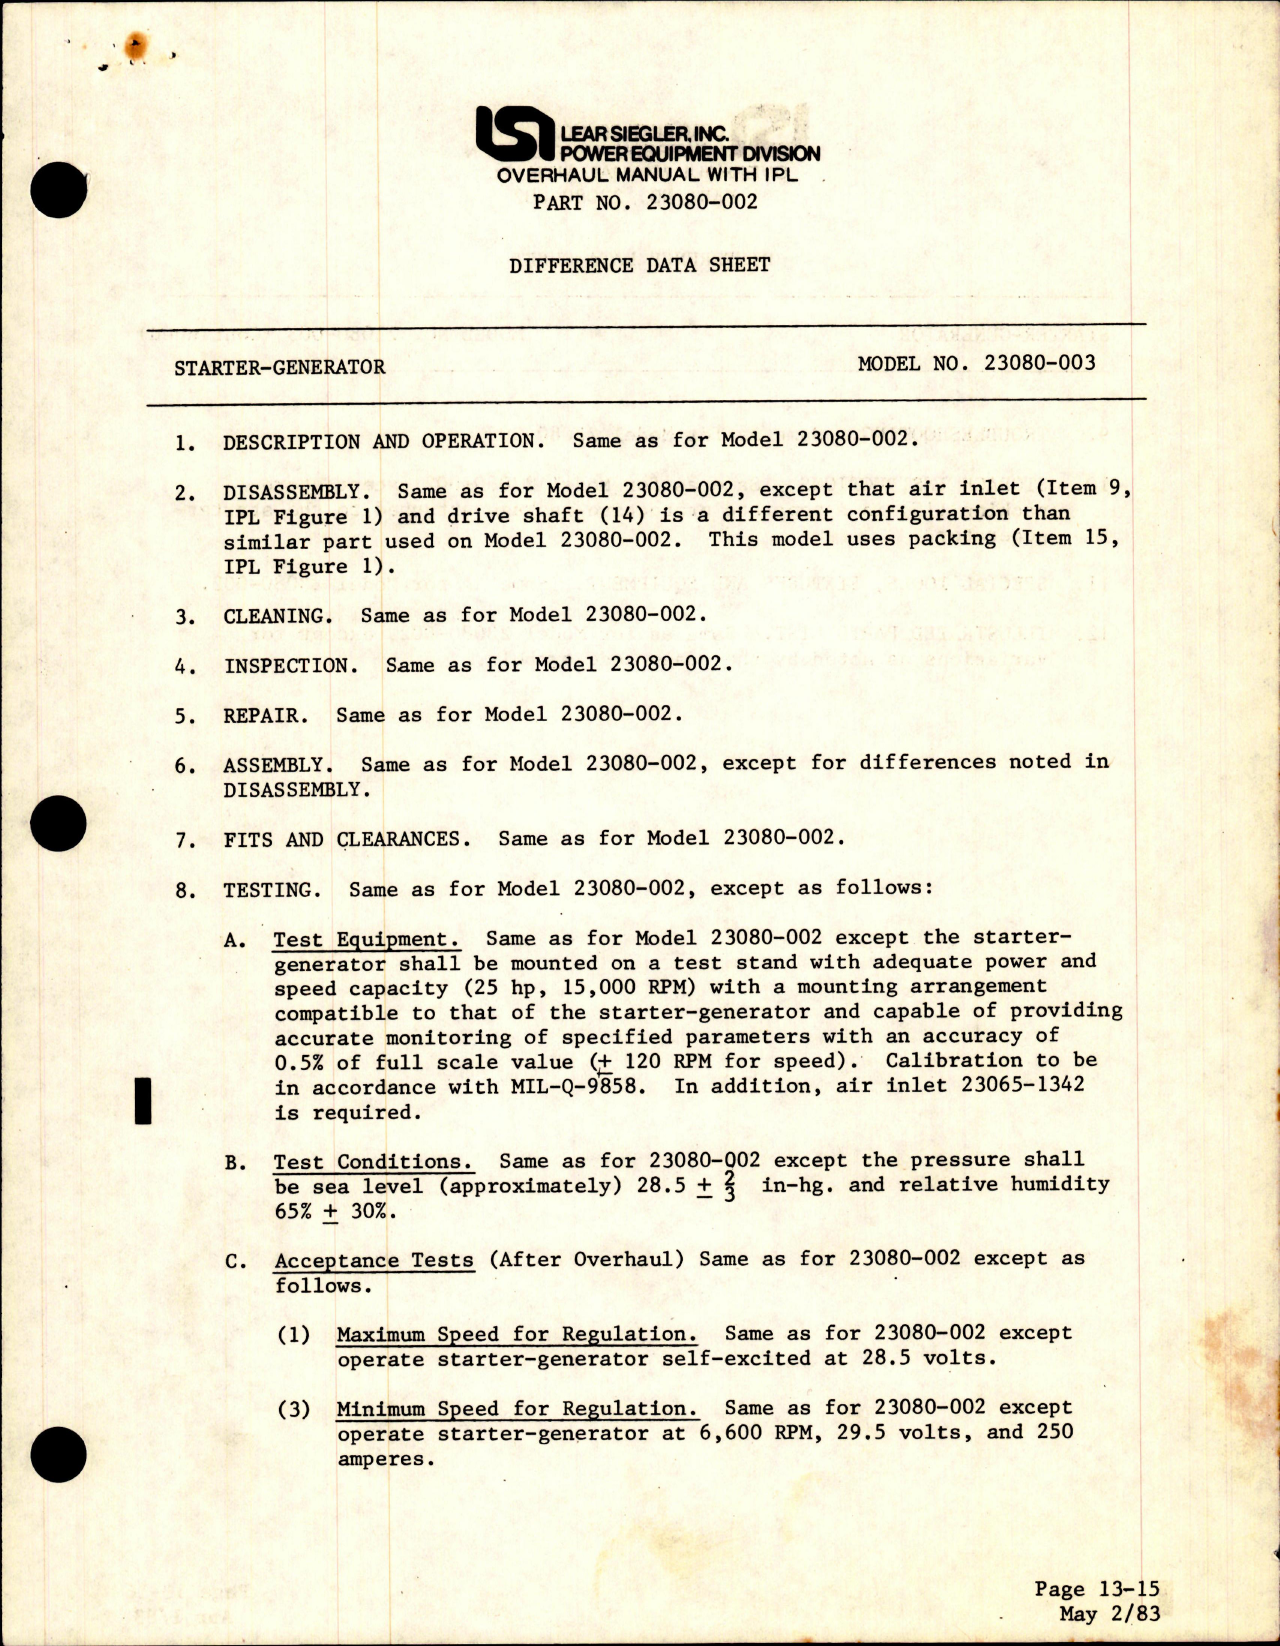 Sample page 5 from AirCorps Library document: Overhaul Manual with Illustrated Parts List for DC Starter Generator - Part 23080 Series